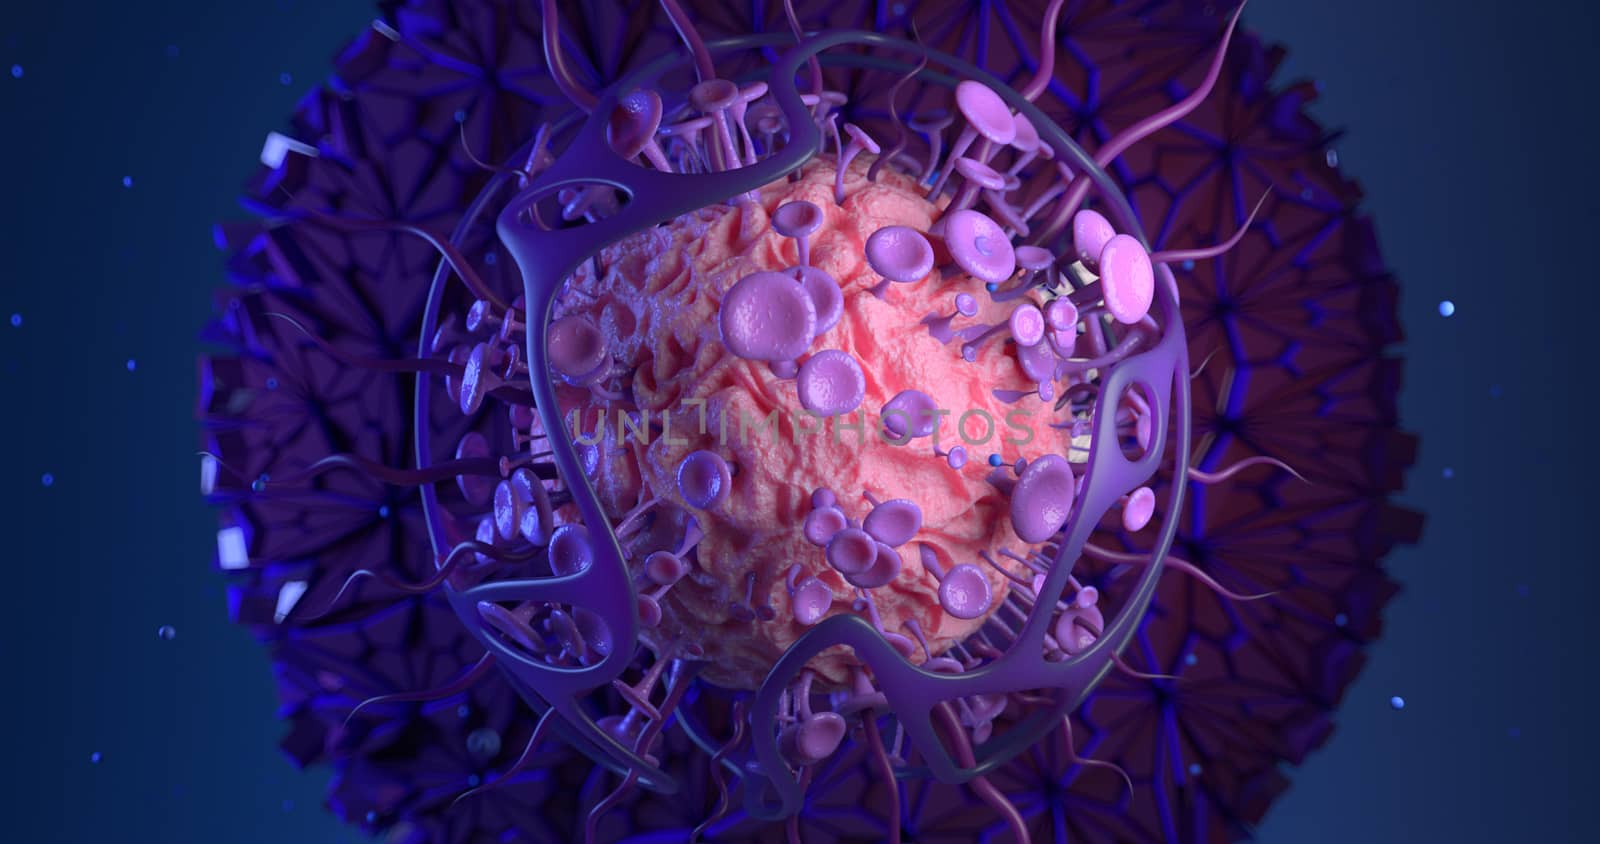 3d rendering of virus and cell. by FREEDOM-ELEMENT